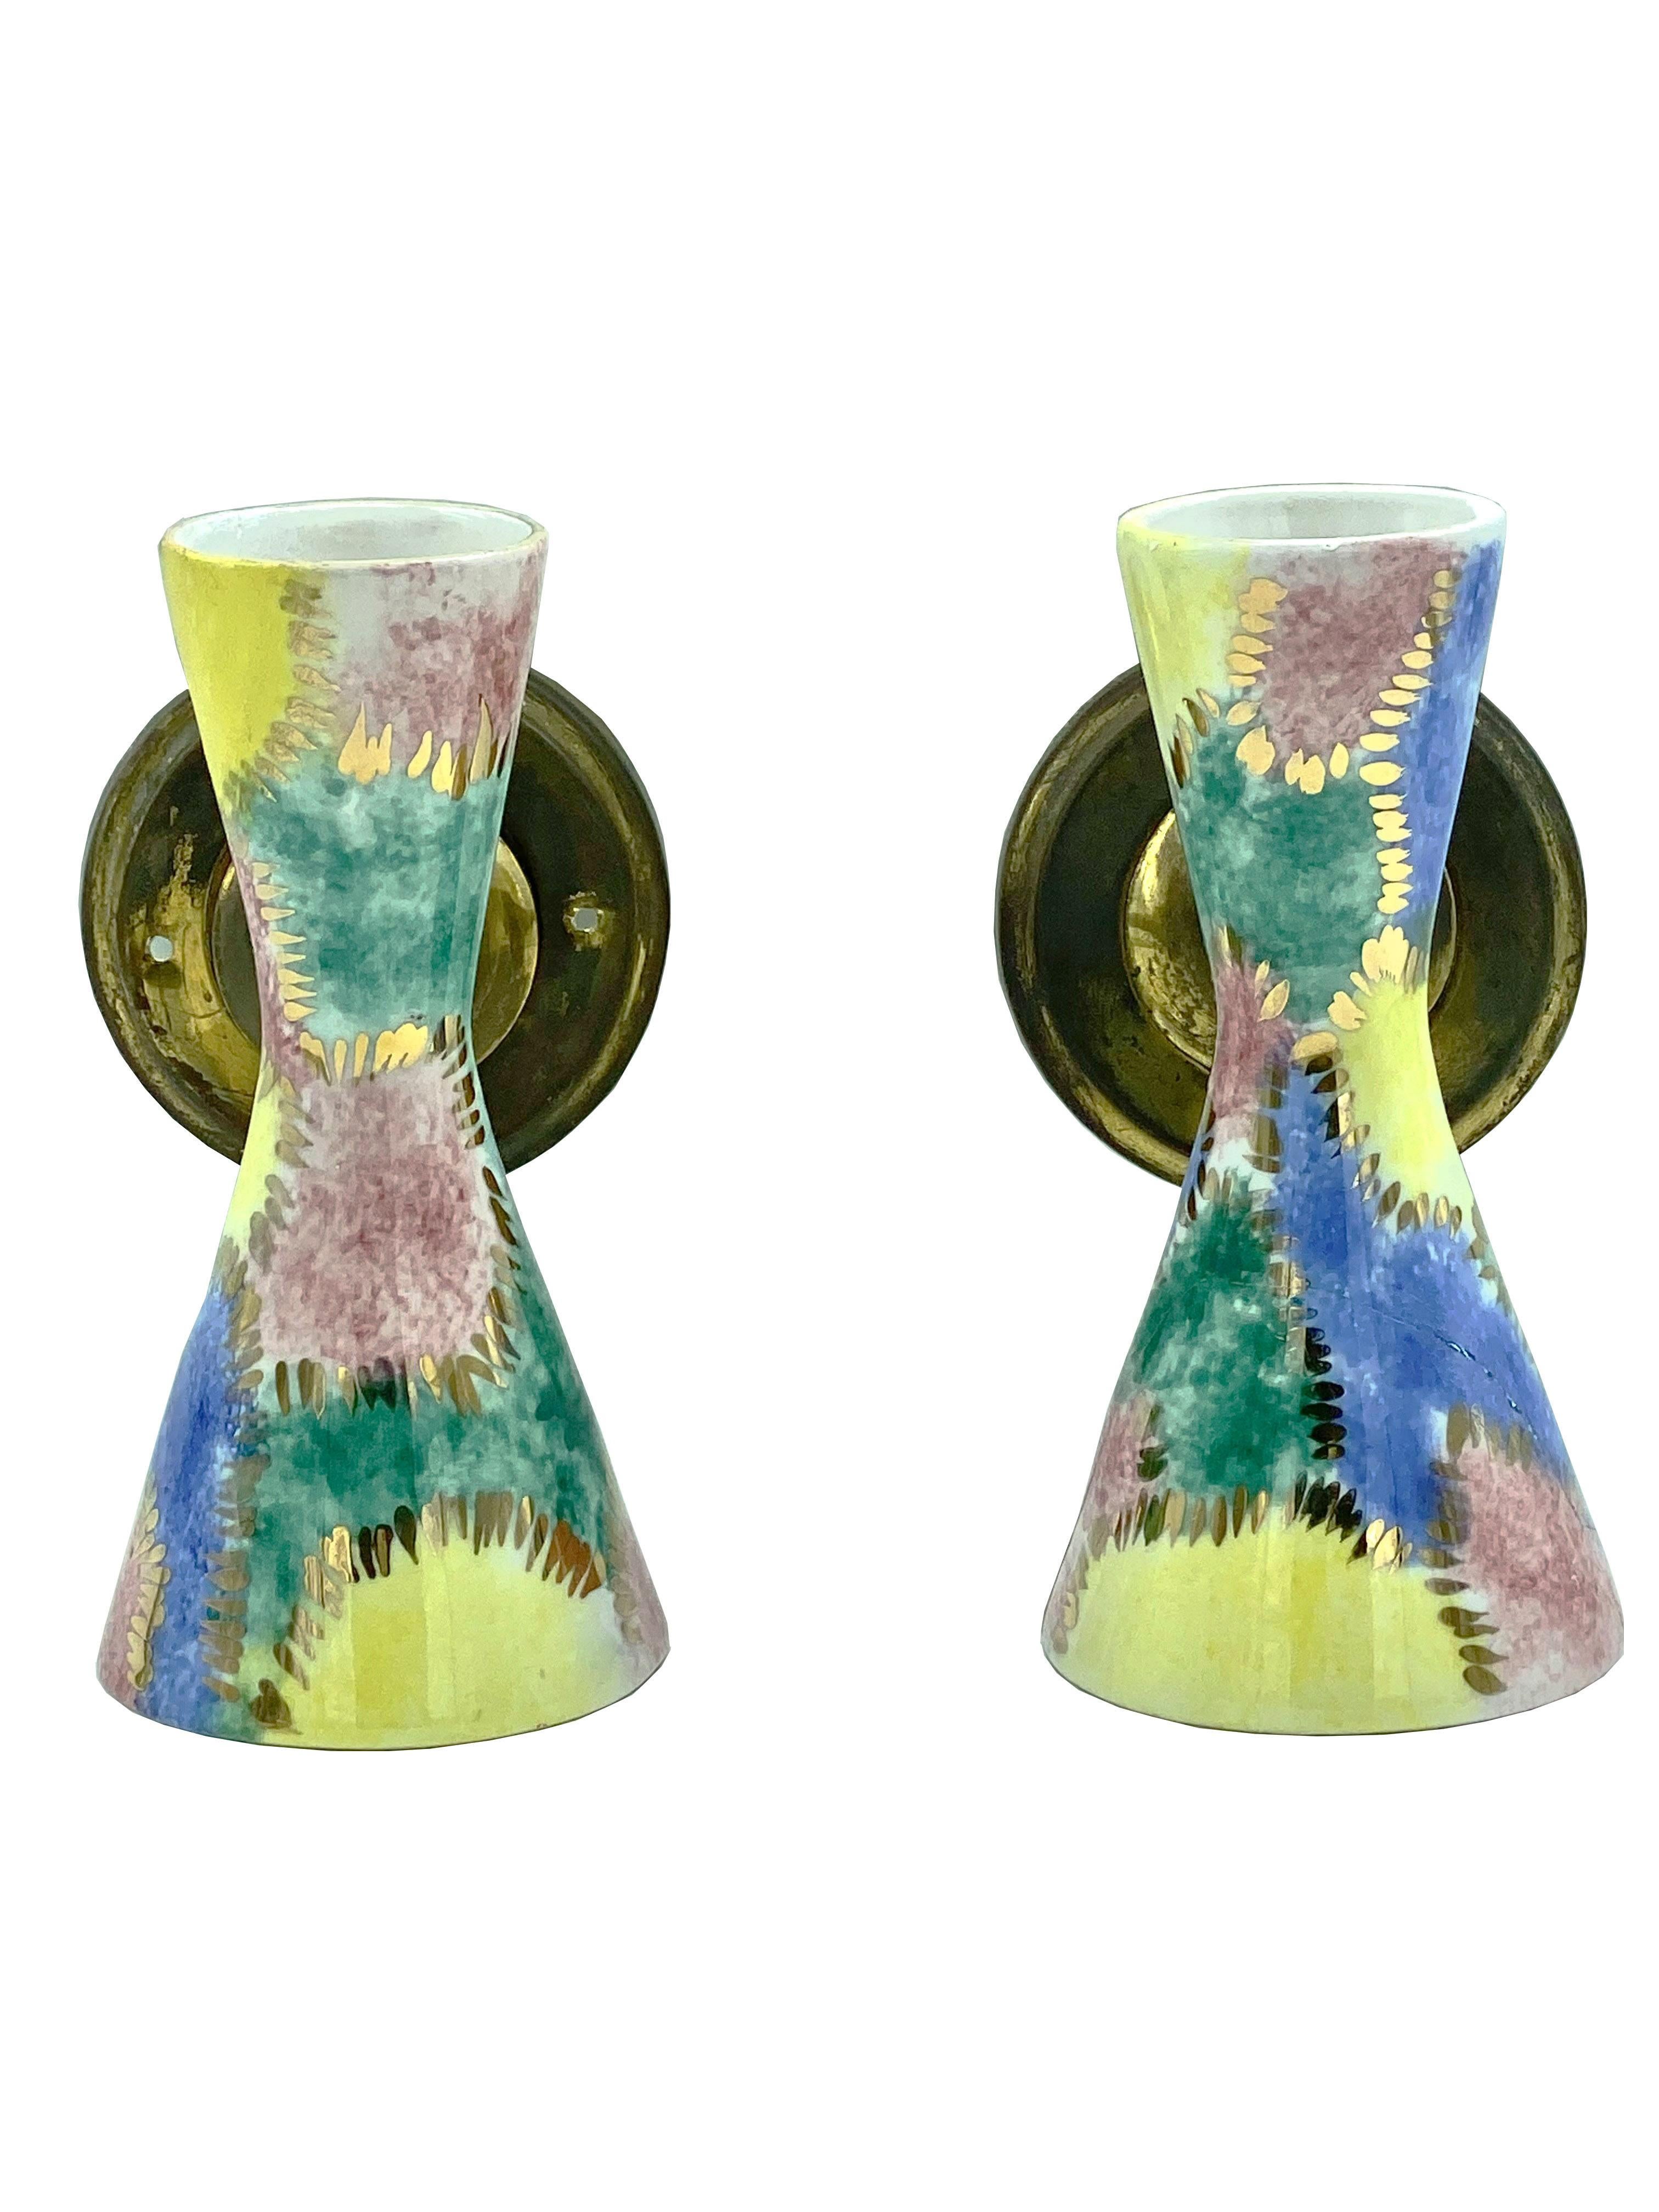 Pair of hand-decorated cone-shaped wall lamps from the 1950s, a particular workmanship where time seems to have marked its years. Indirect, wide lighting above and cut-off lighting below, creating a visual impact of decoration and architecture on